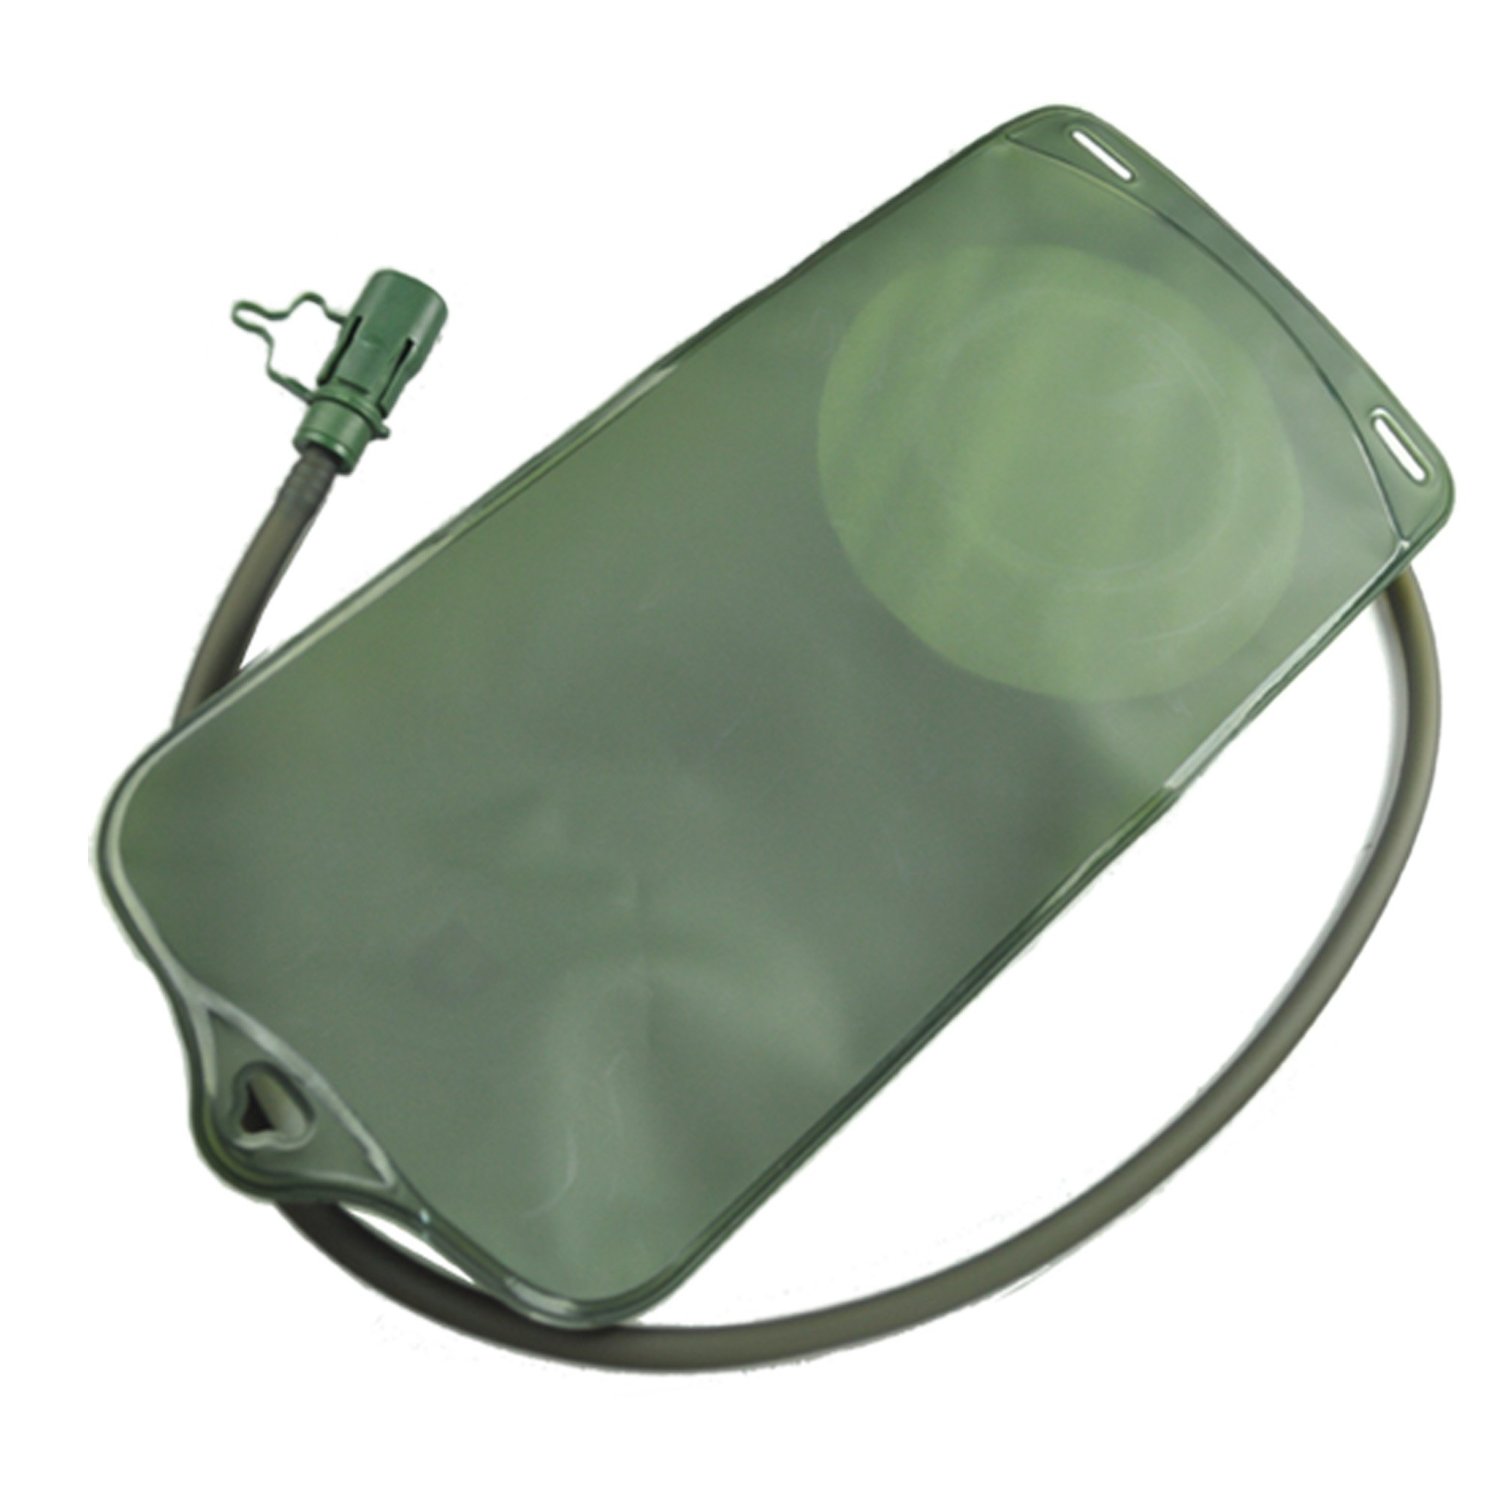 2L-Bicycle-Water-Bag-Bladder-Pack-Portable-Drinking-Bag-With-Screw-For-Camping-Hiking-Cycling-27172